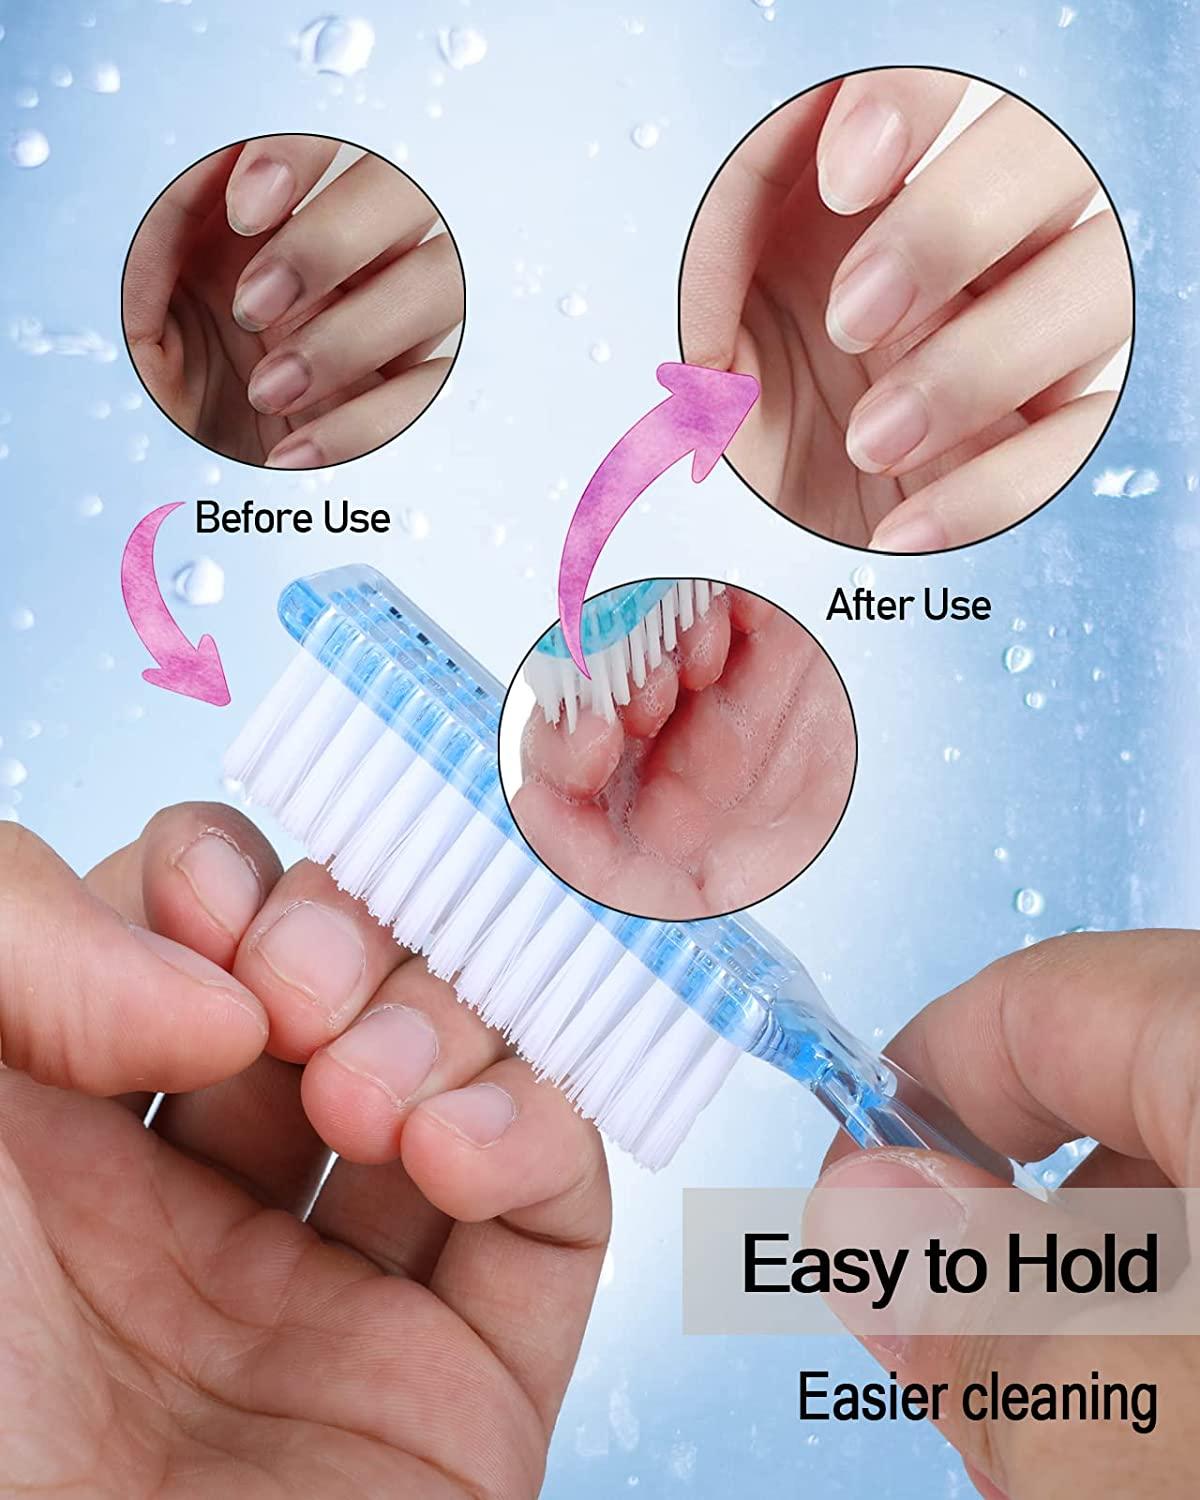 Nail Brushes for Cleaning Fingernails - 20Pcs Handle Grip Nail Brush Kits  for Toes and Nails Cleaner, Hand Fingernail Scrub Brush for Women Men,  Multicolor